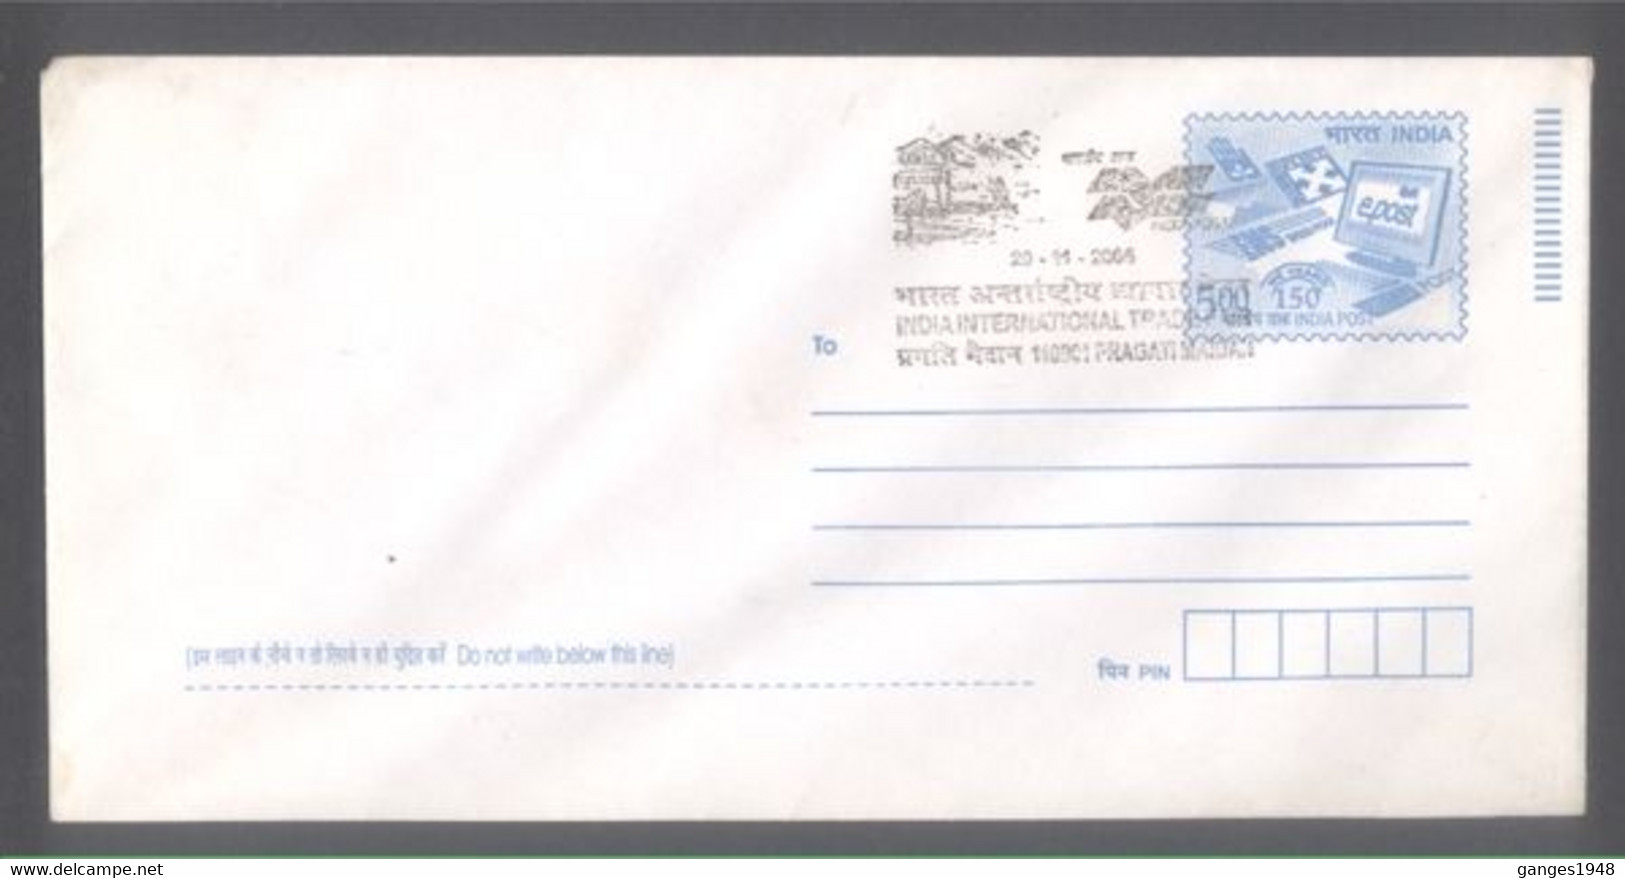 India 2006  Epost  PS Envelope  With  Mail Runner  International Trade Fair  Cancellation  # 35678 D  Inde  Indien - Briefe